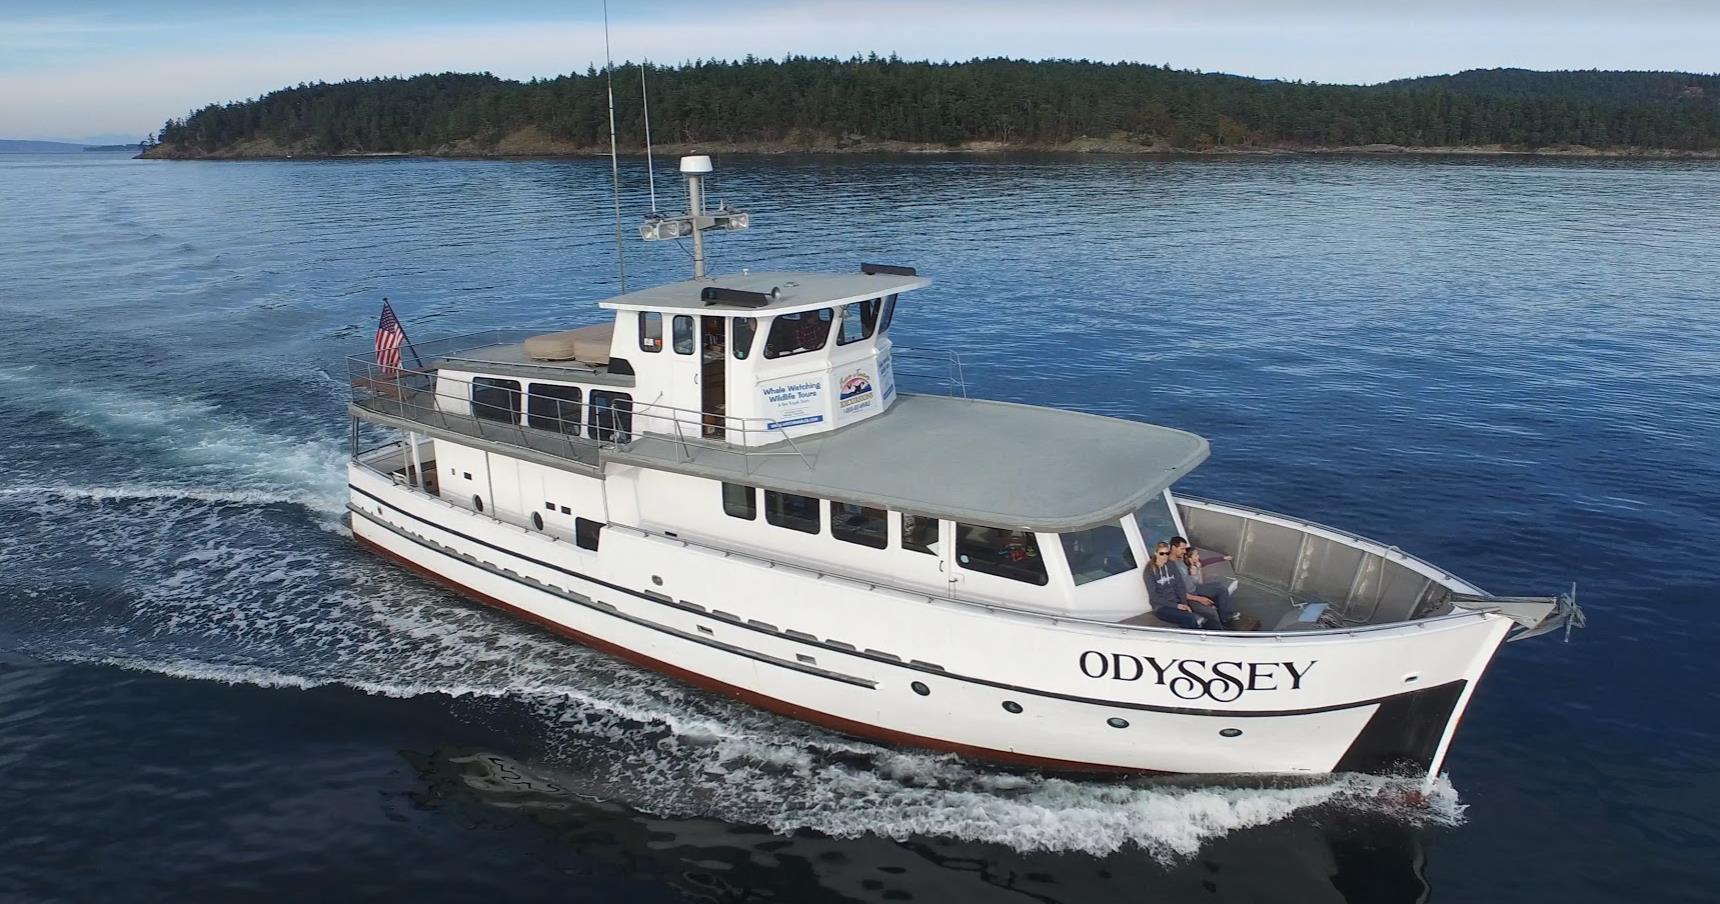 Whale Watching Vessel "Odyssey" with daily whale watching departures from Friday Harbor, WA.